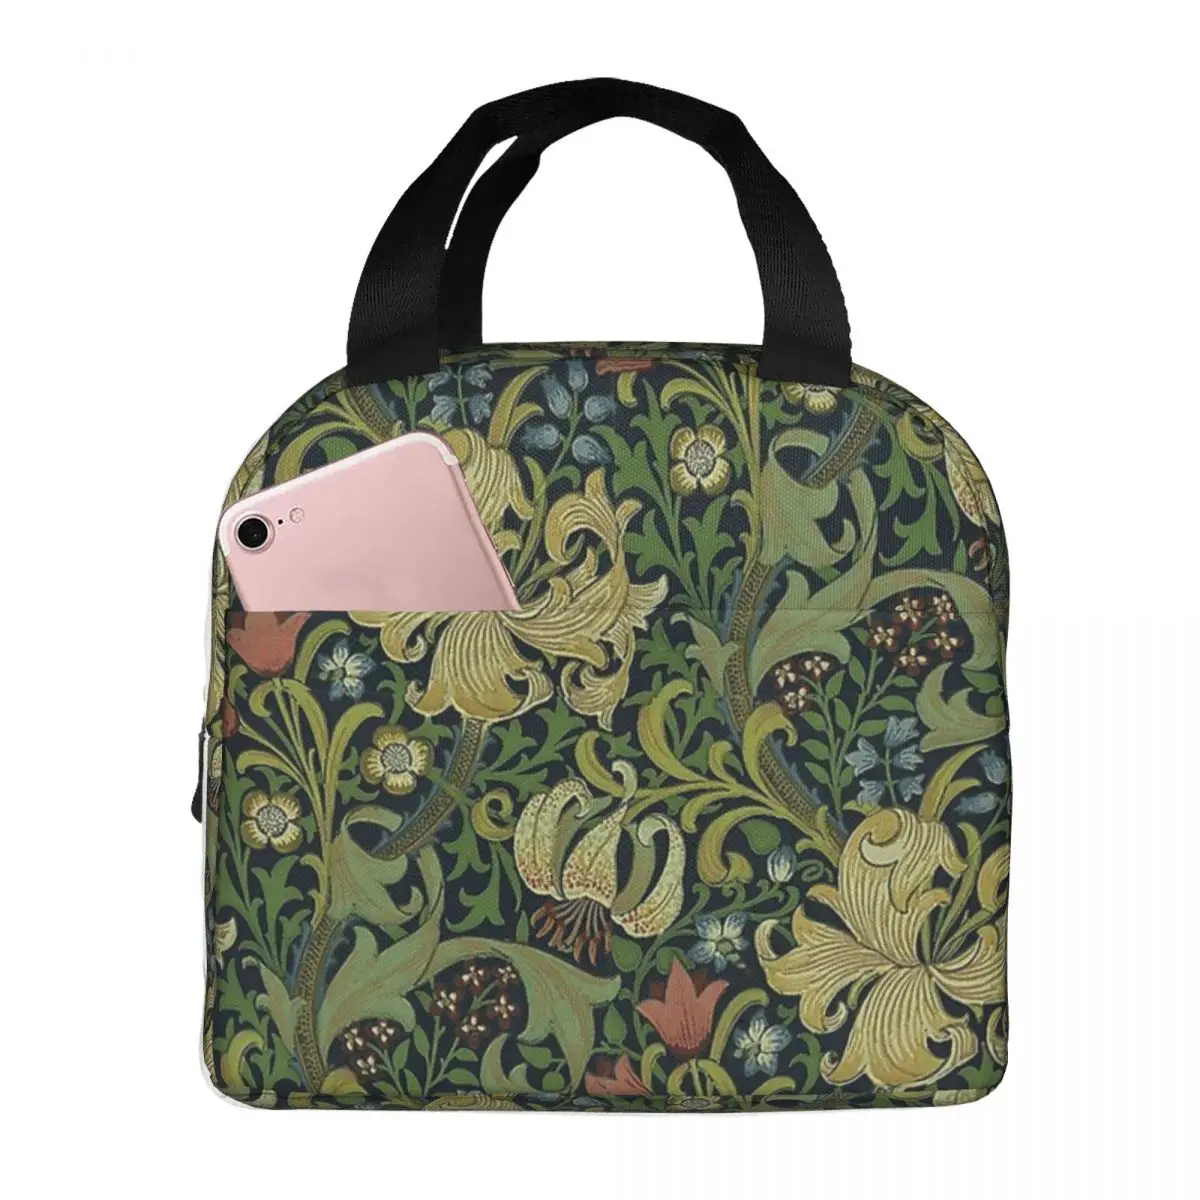 William Morris Lunch Bag Portable Insulated Canvas Cooler Floral Vintage Victorian Flowers Thermal Food Picnic Lunch Box